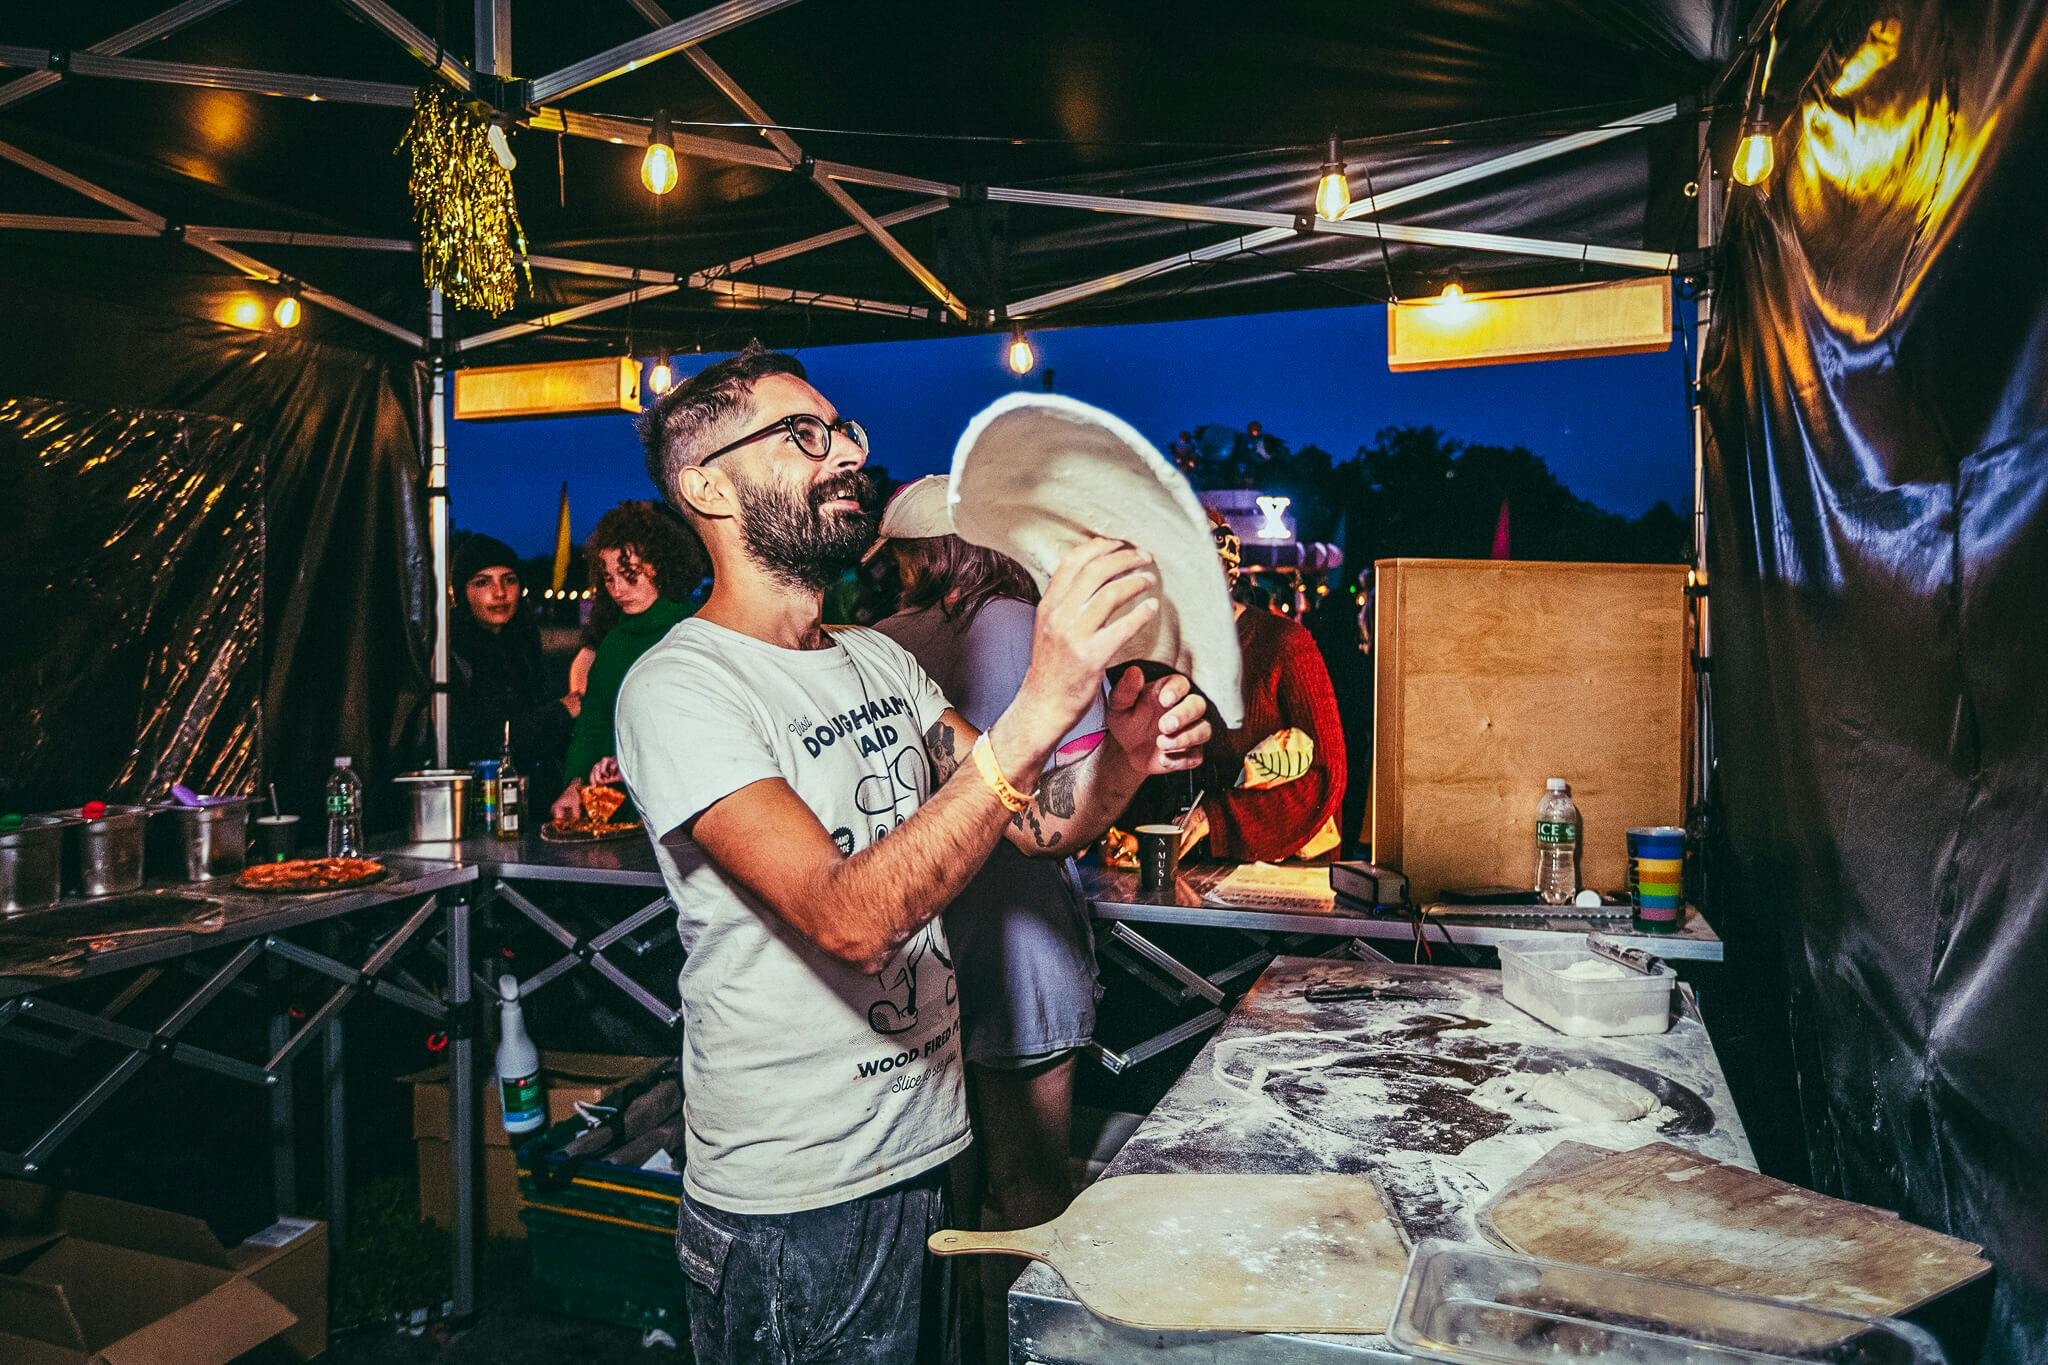 Chef tossing a pizza